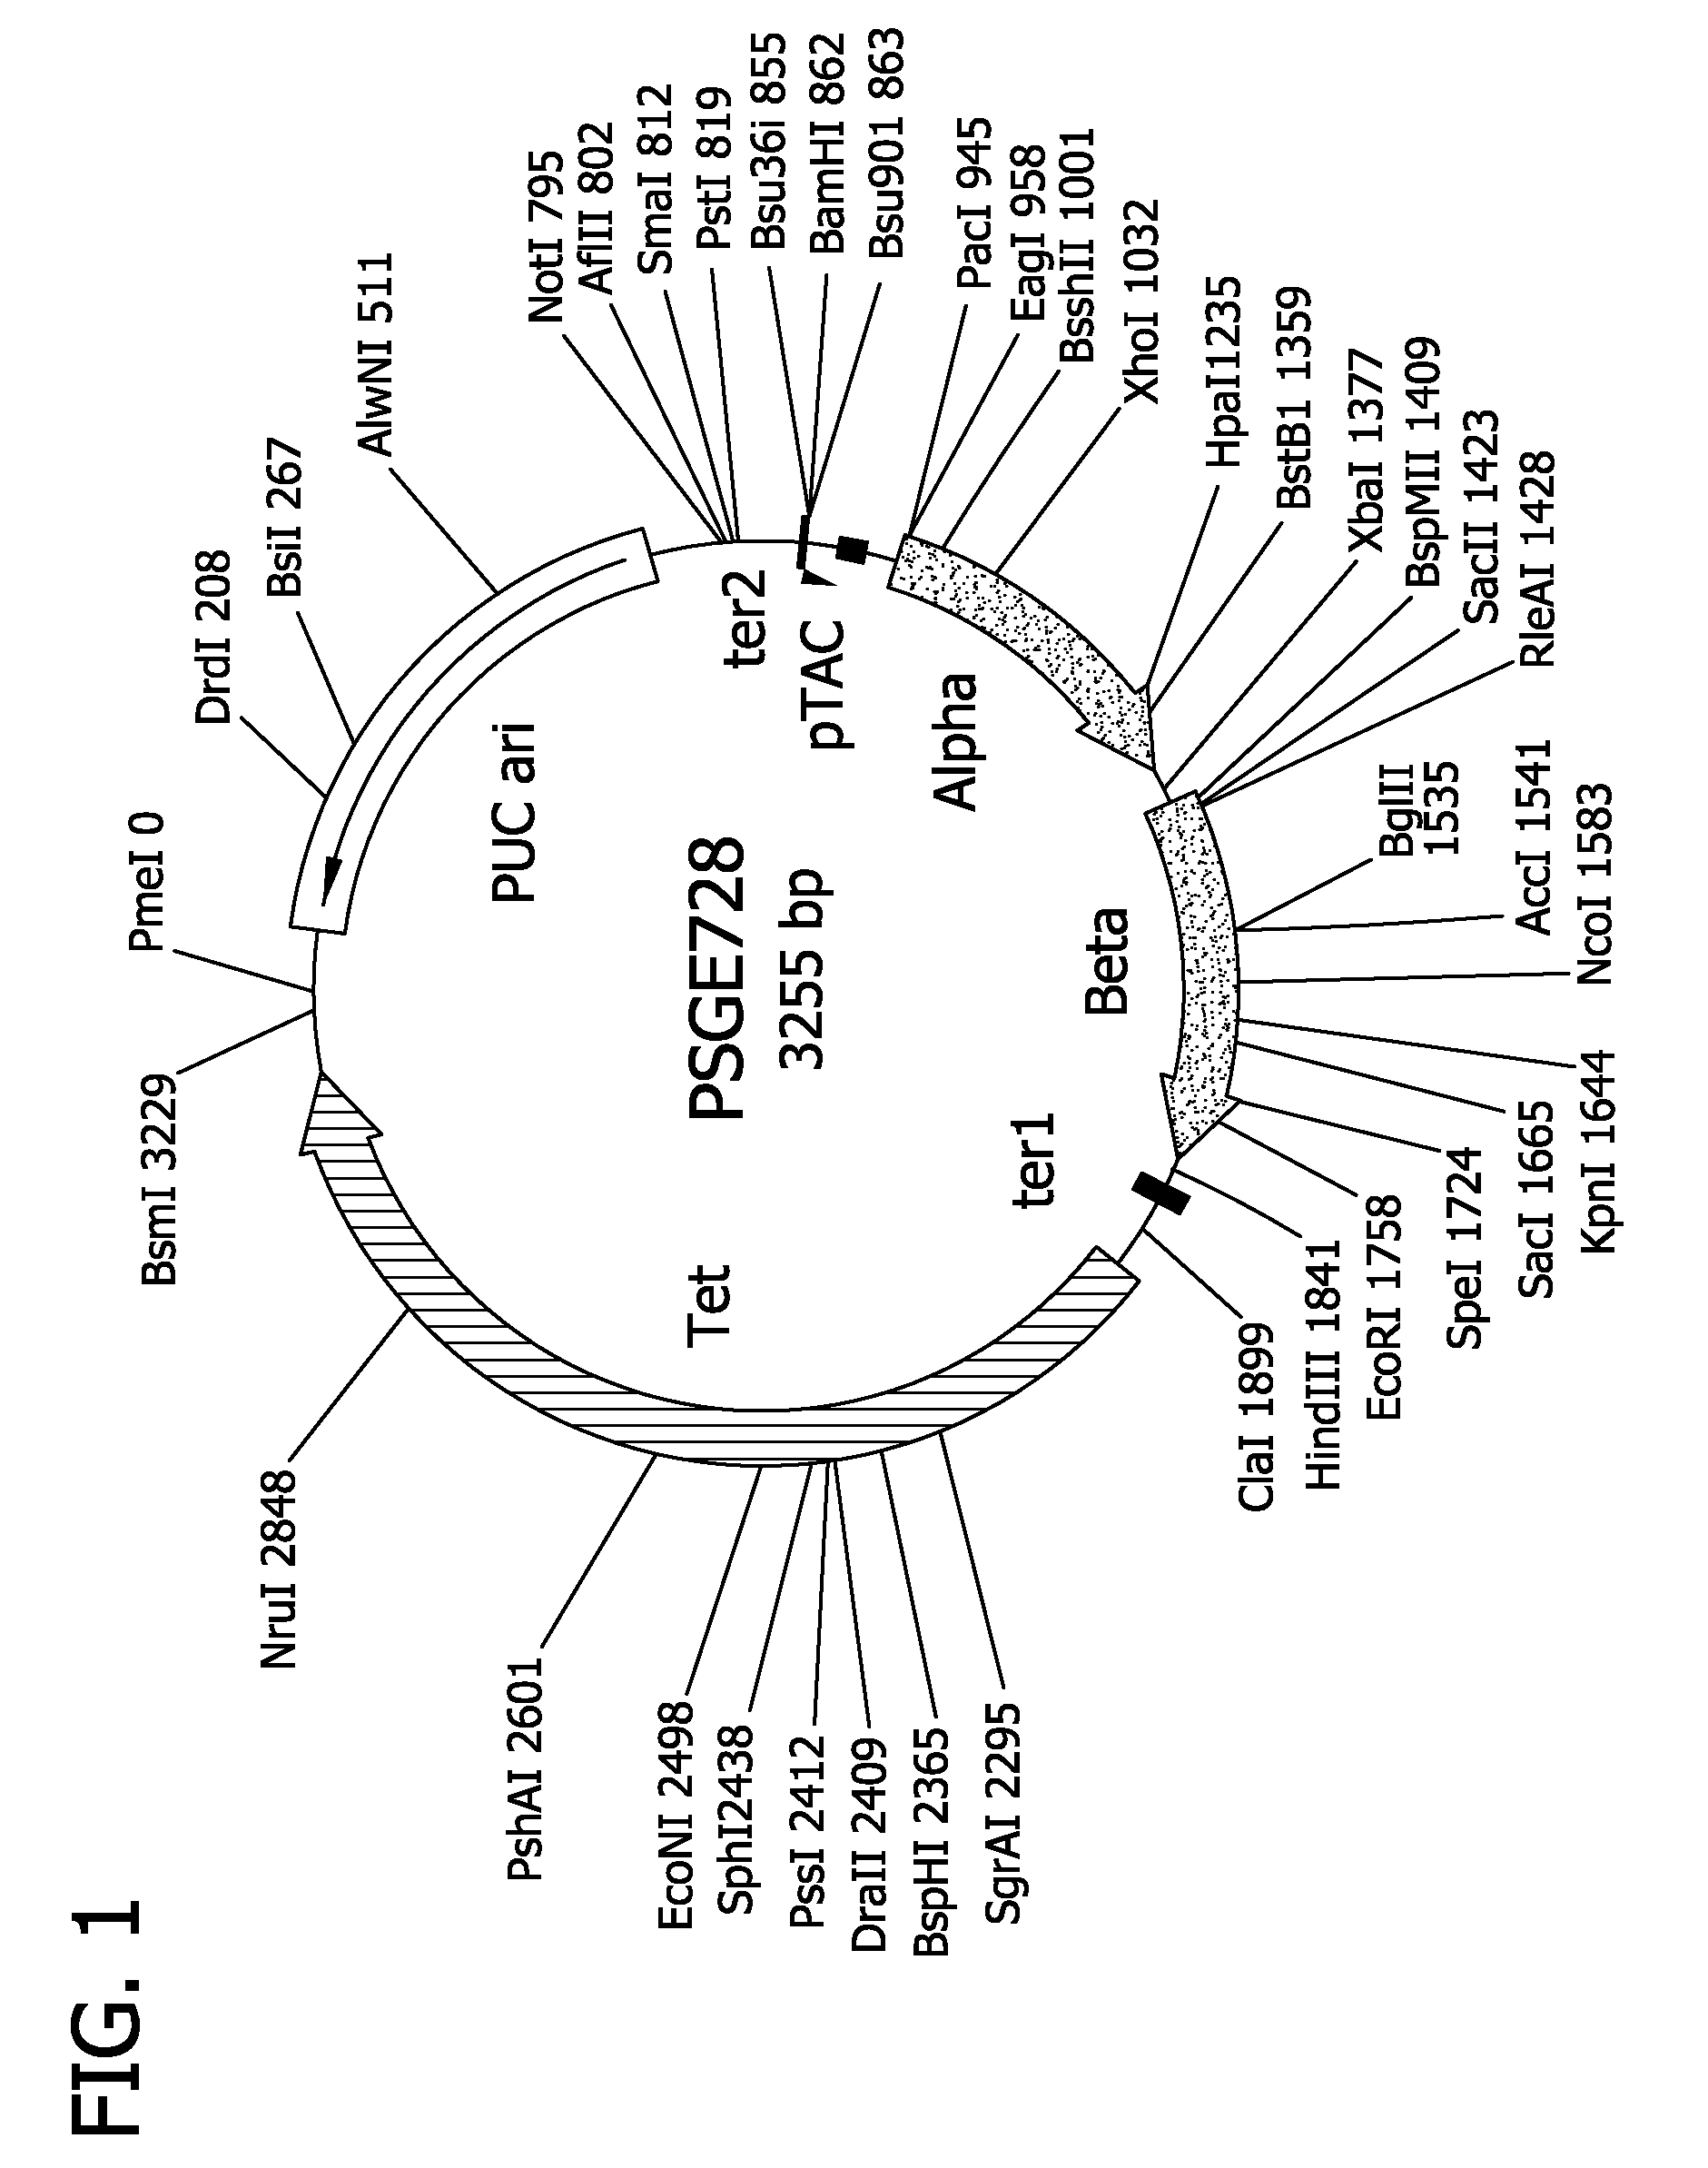 Reduced side-effect hemoglobin compositions